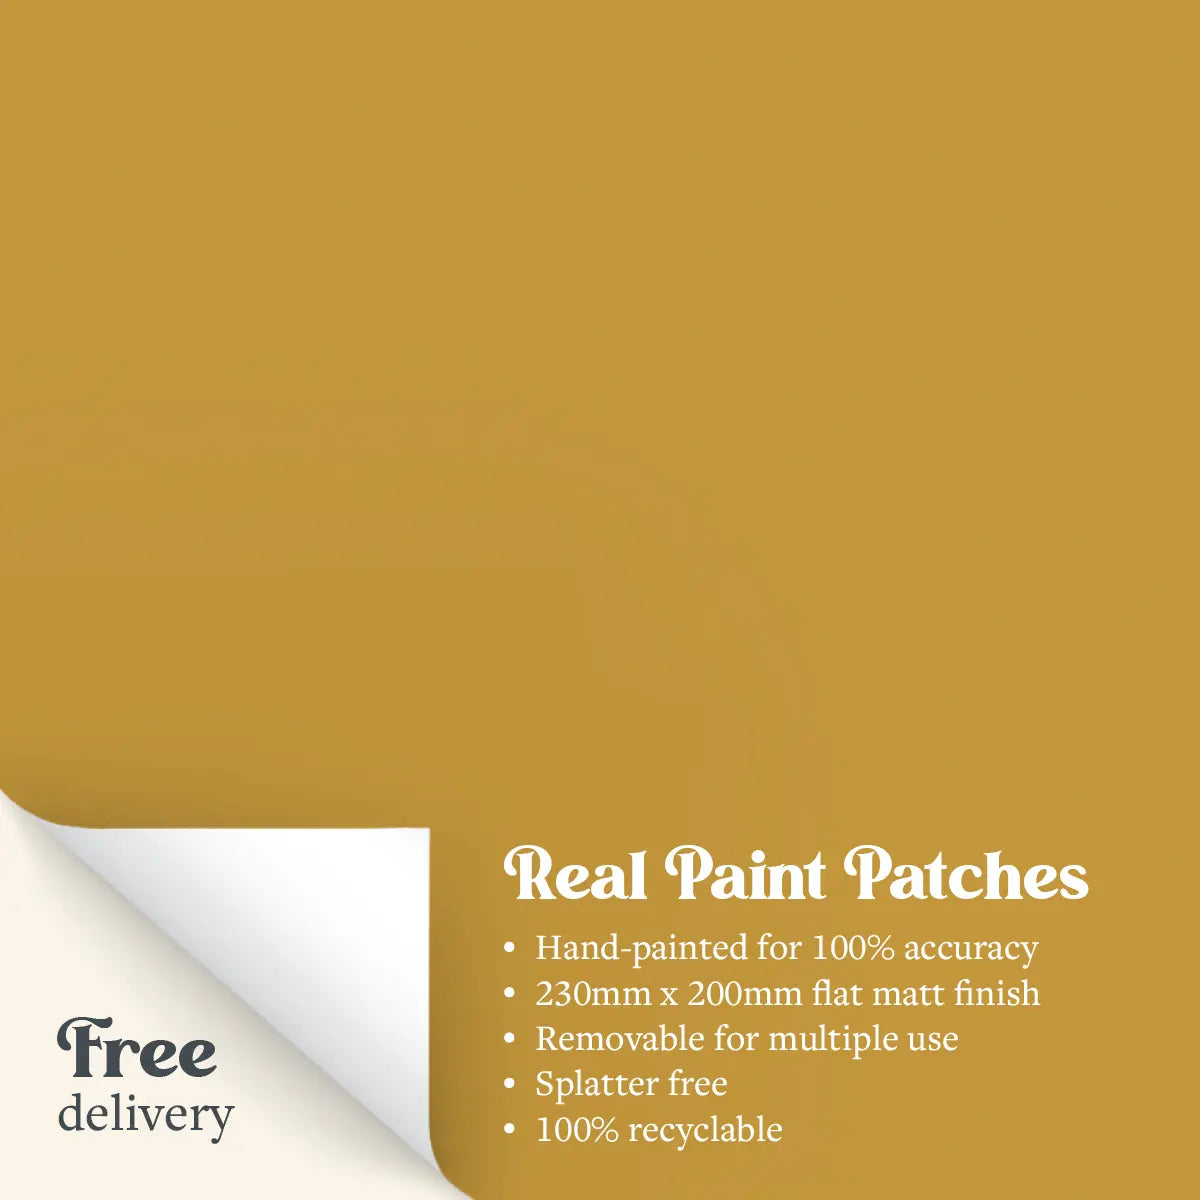 A Real Paint Patch of Zhoosh Paints' Sundowner yellow paint, with text outlining the benefits